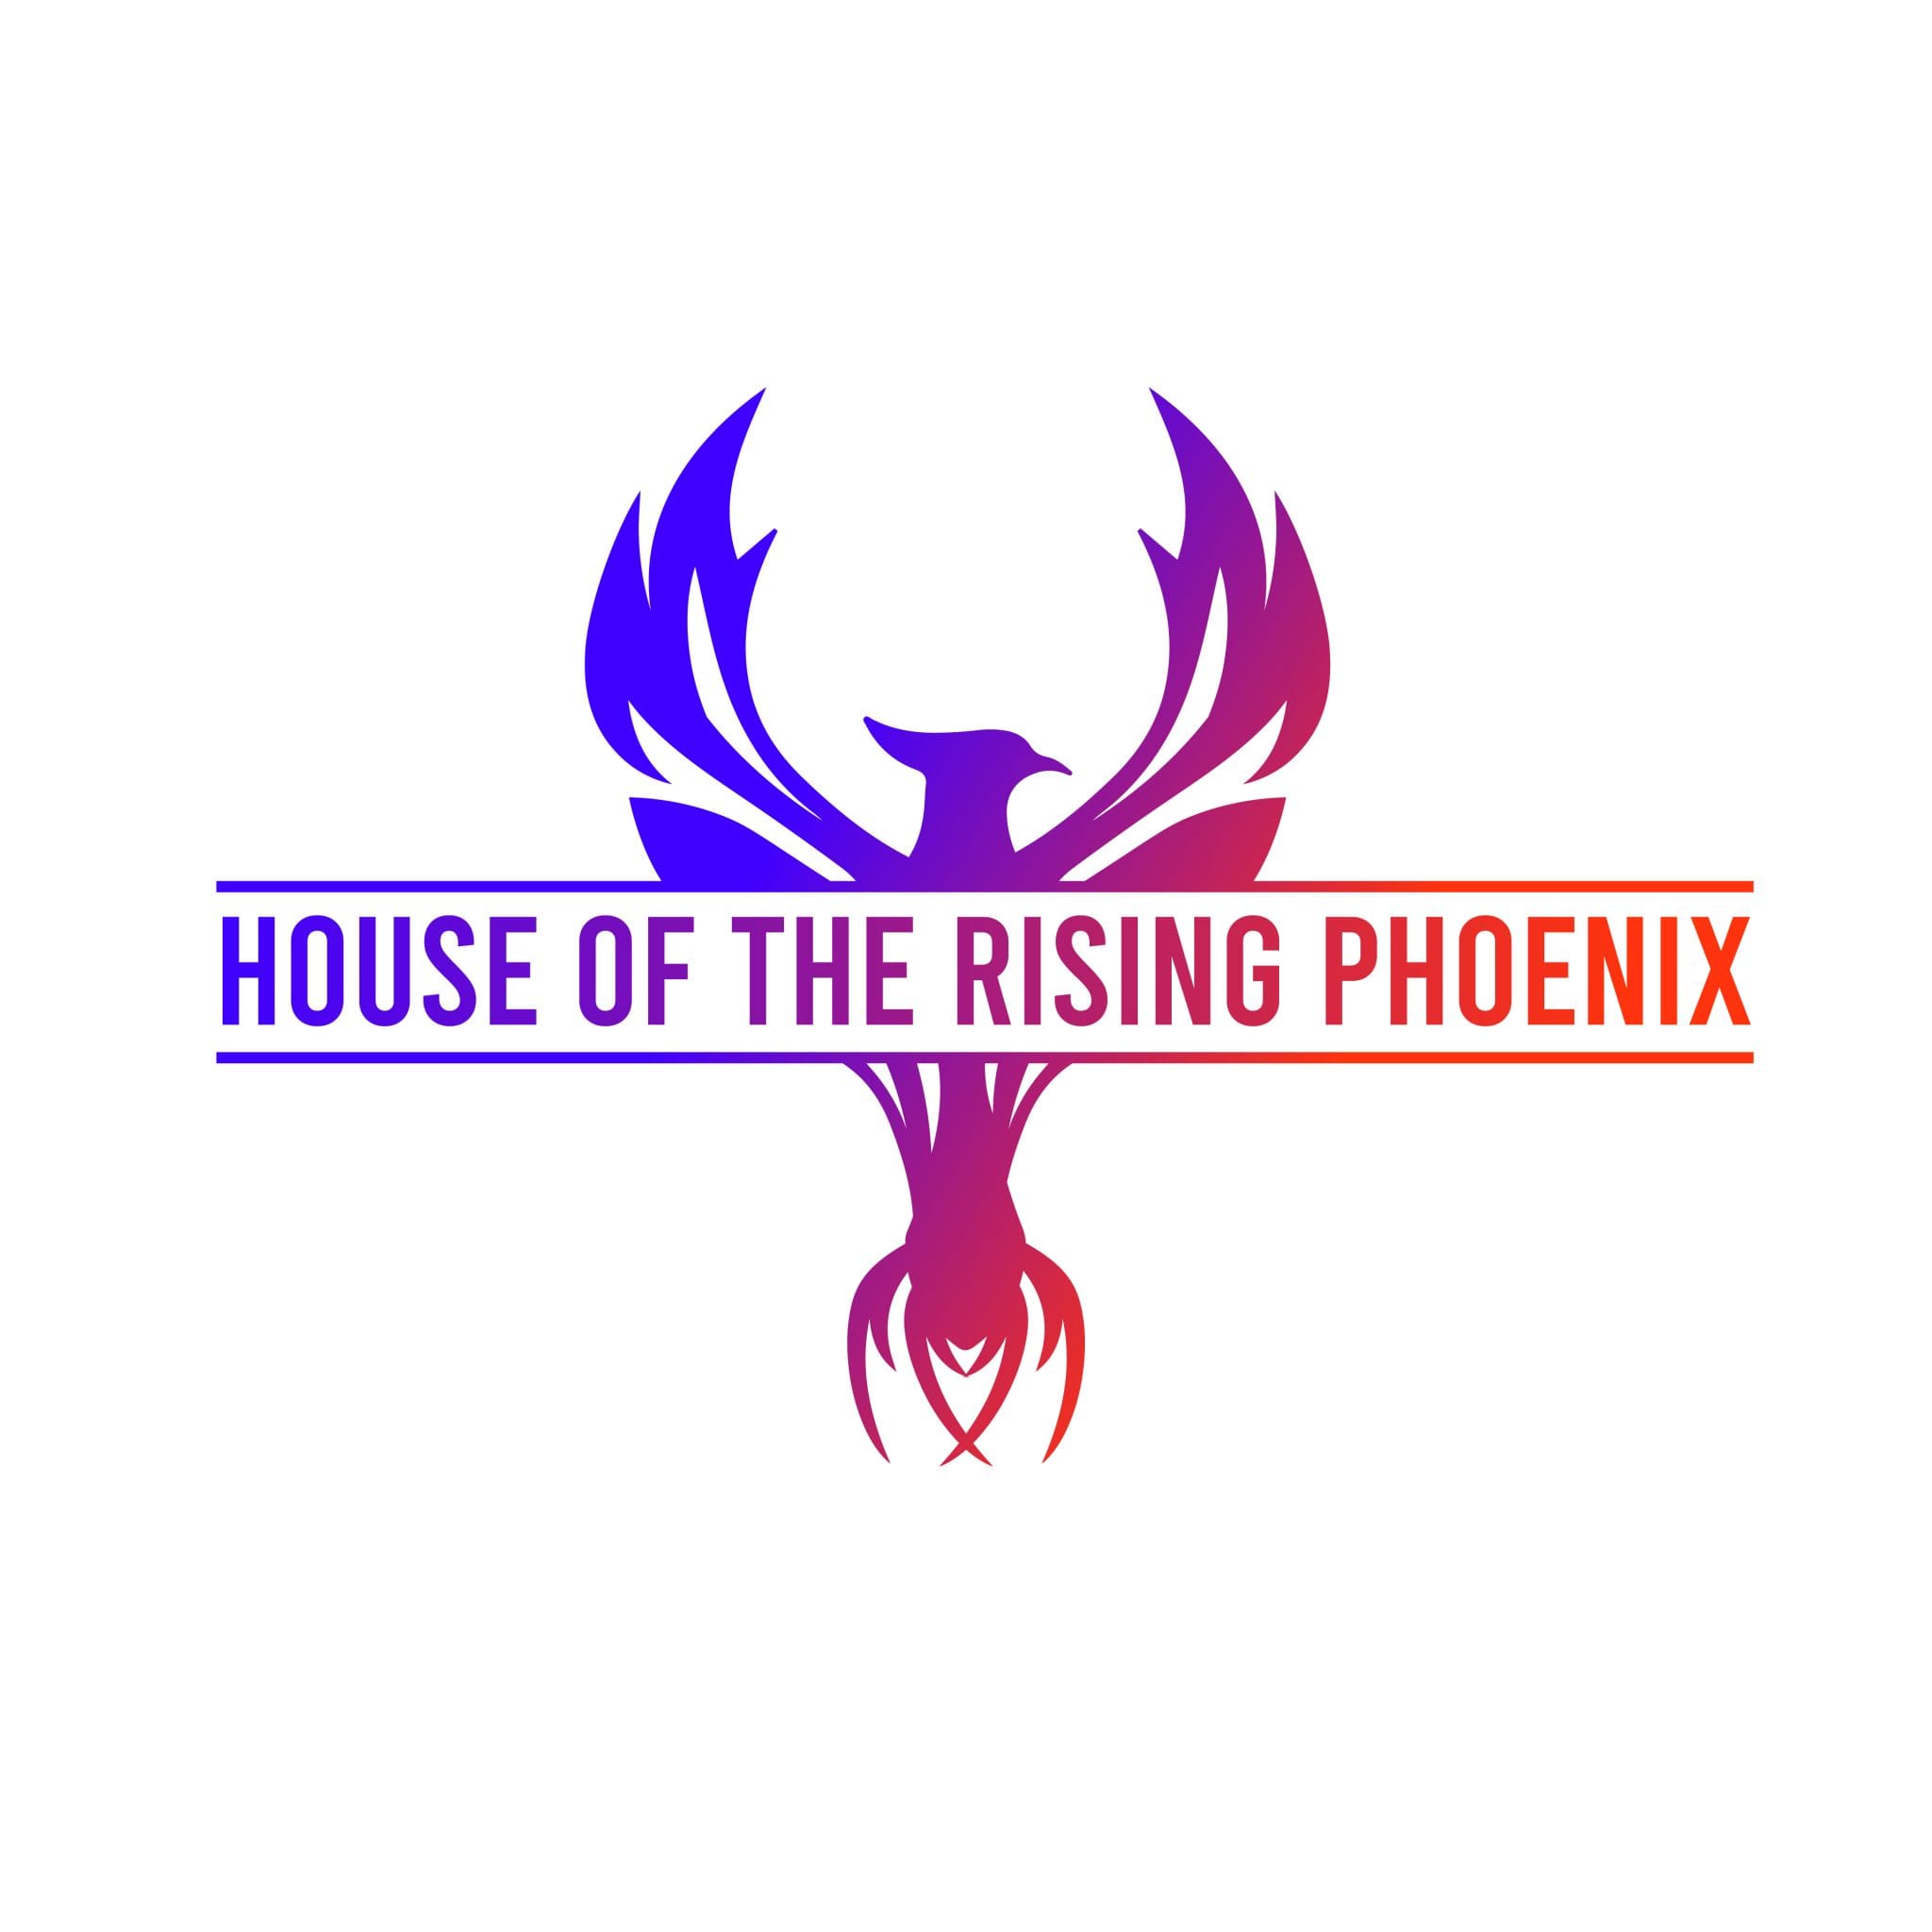 Soul Transformations - House of the Rising Phoenix